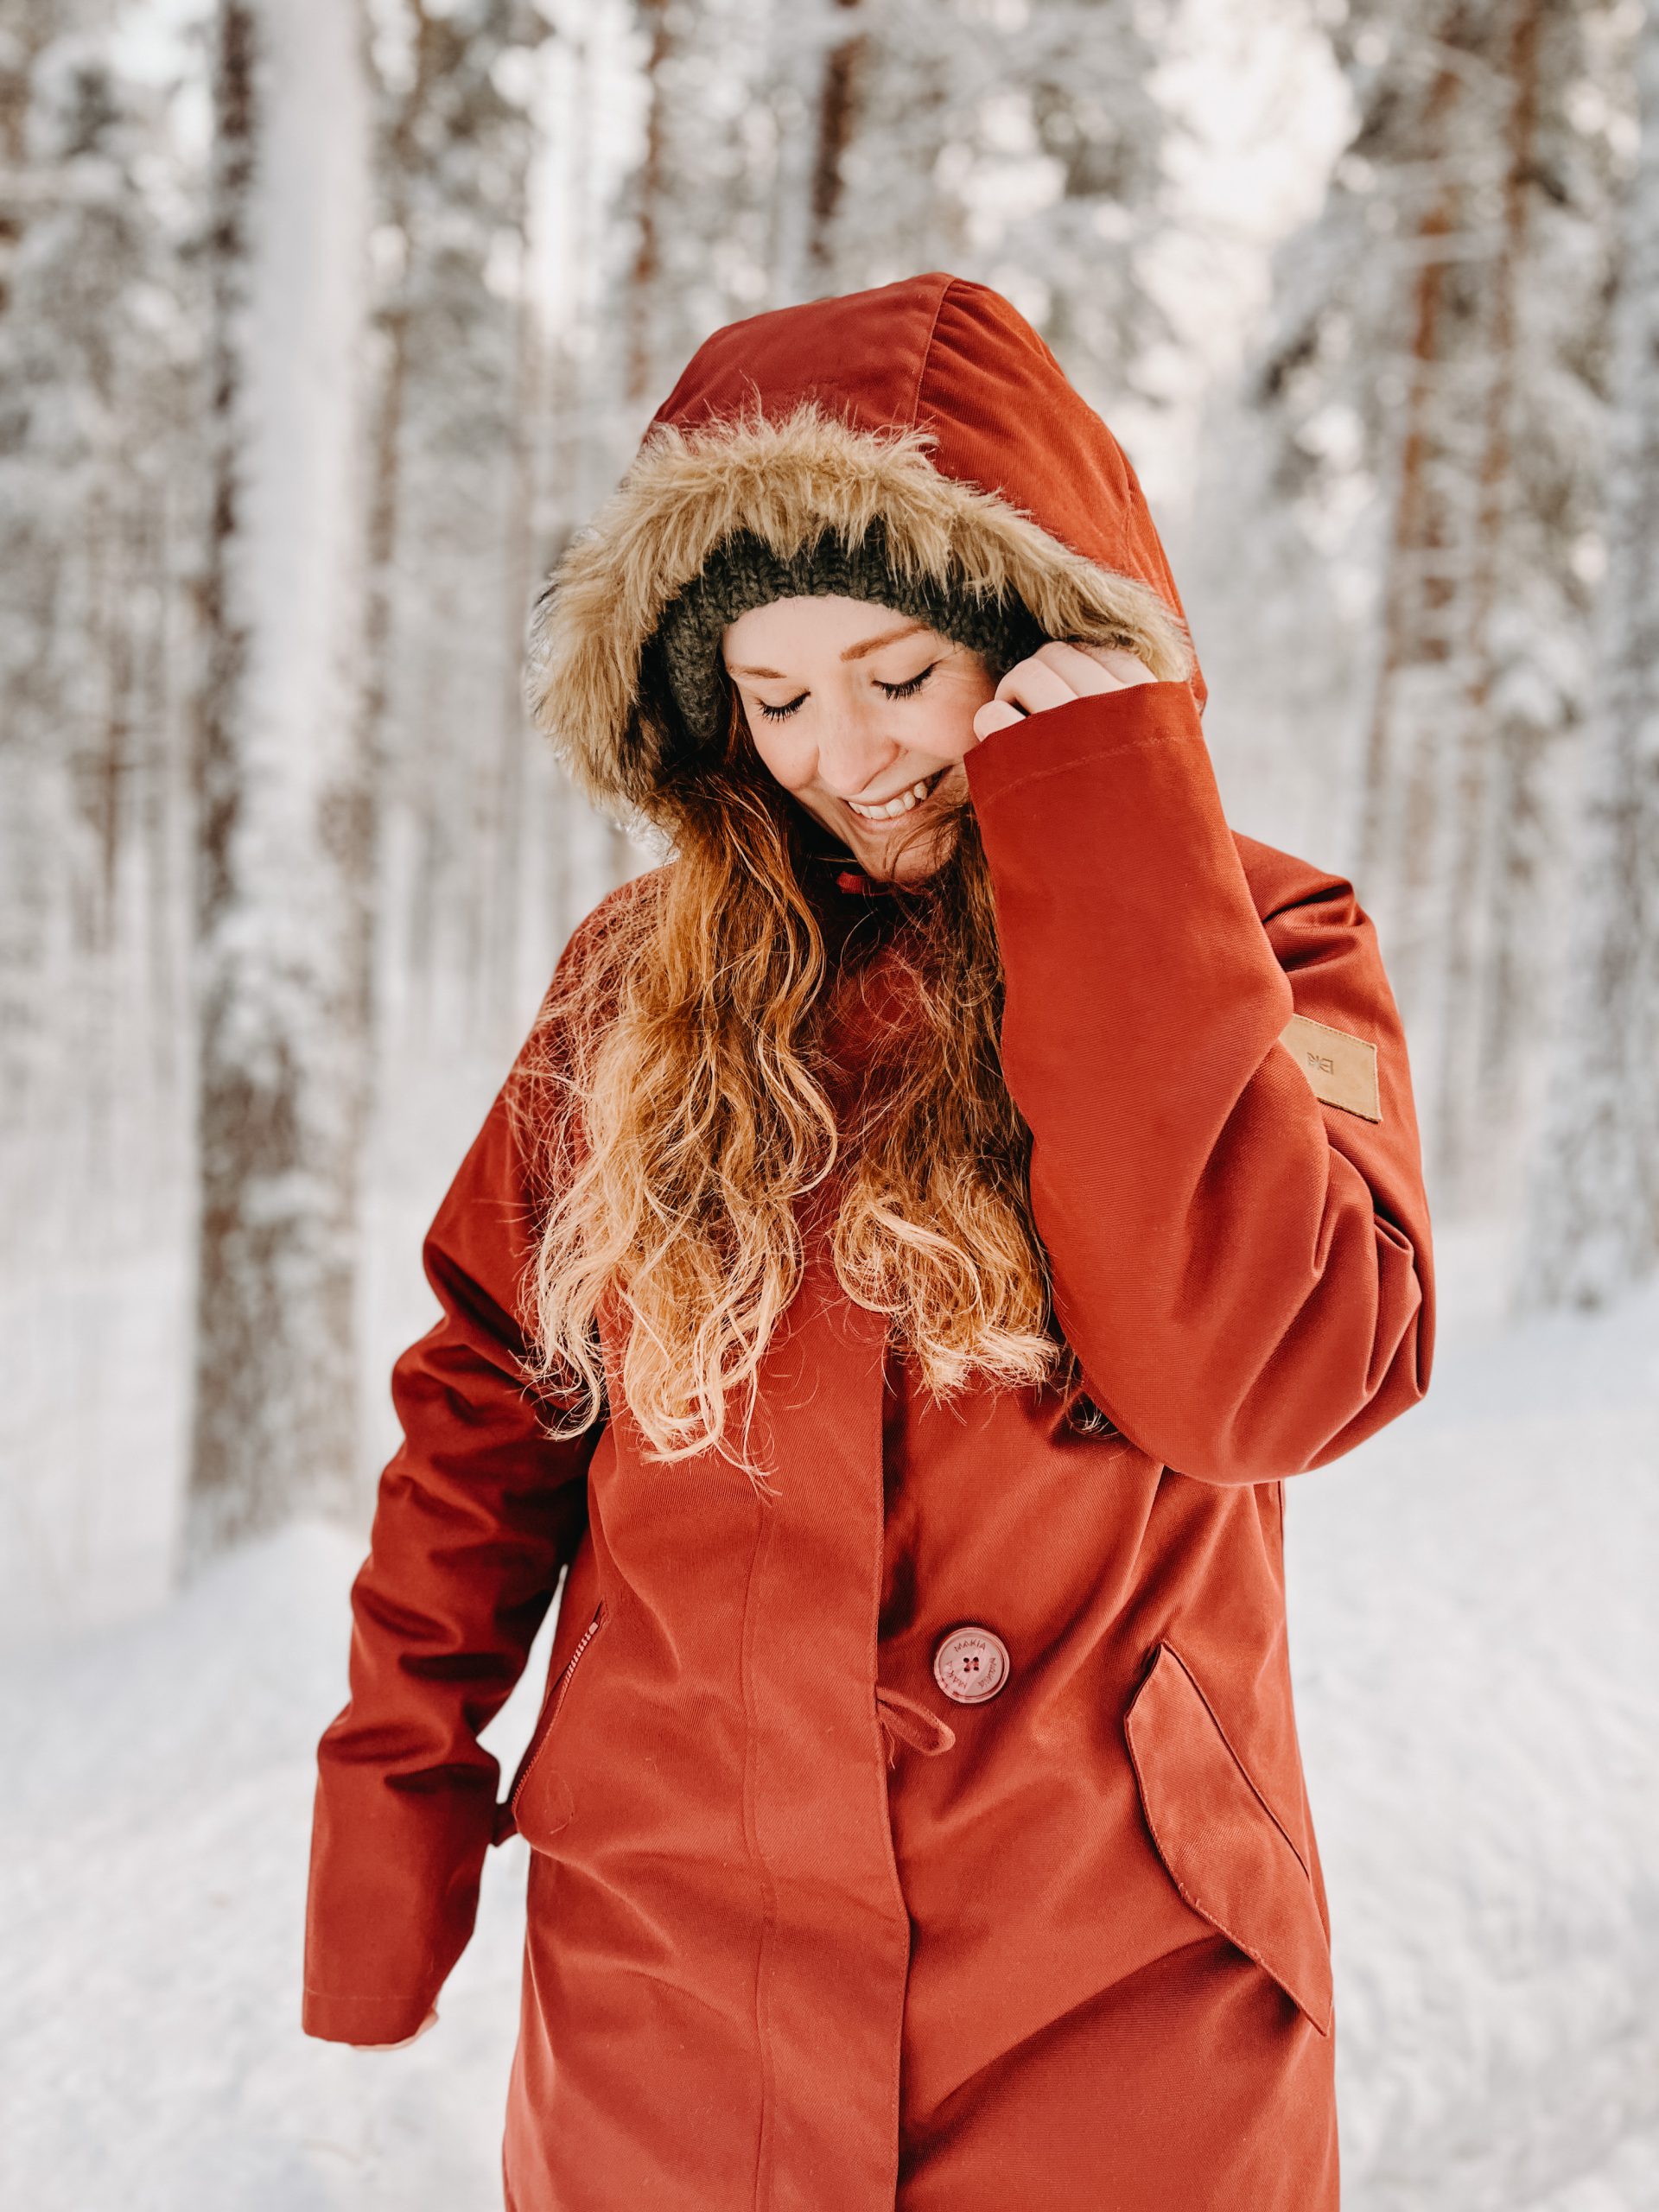 Winter Outfits: A Guide to Cold-Weather Style